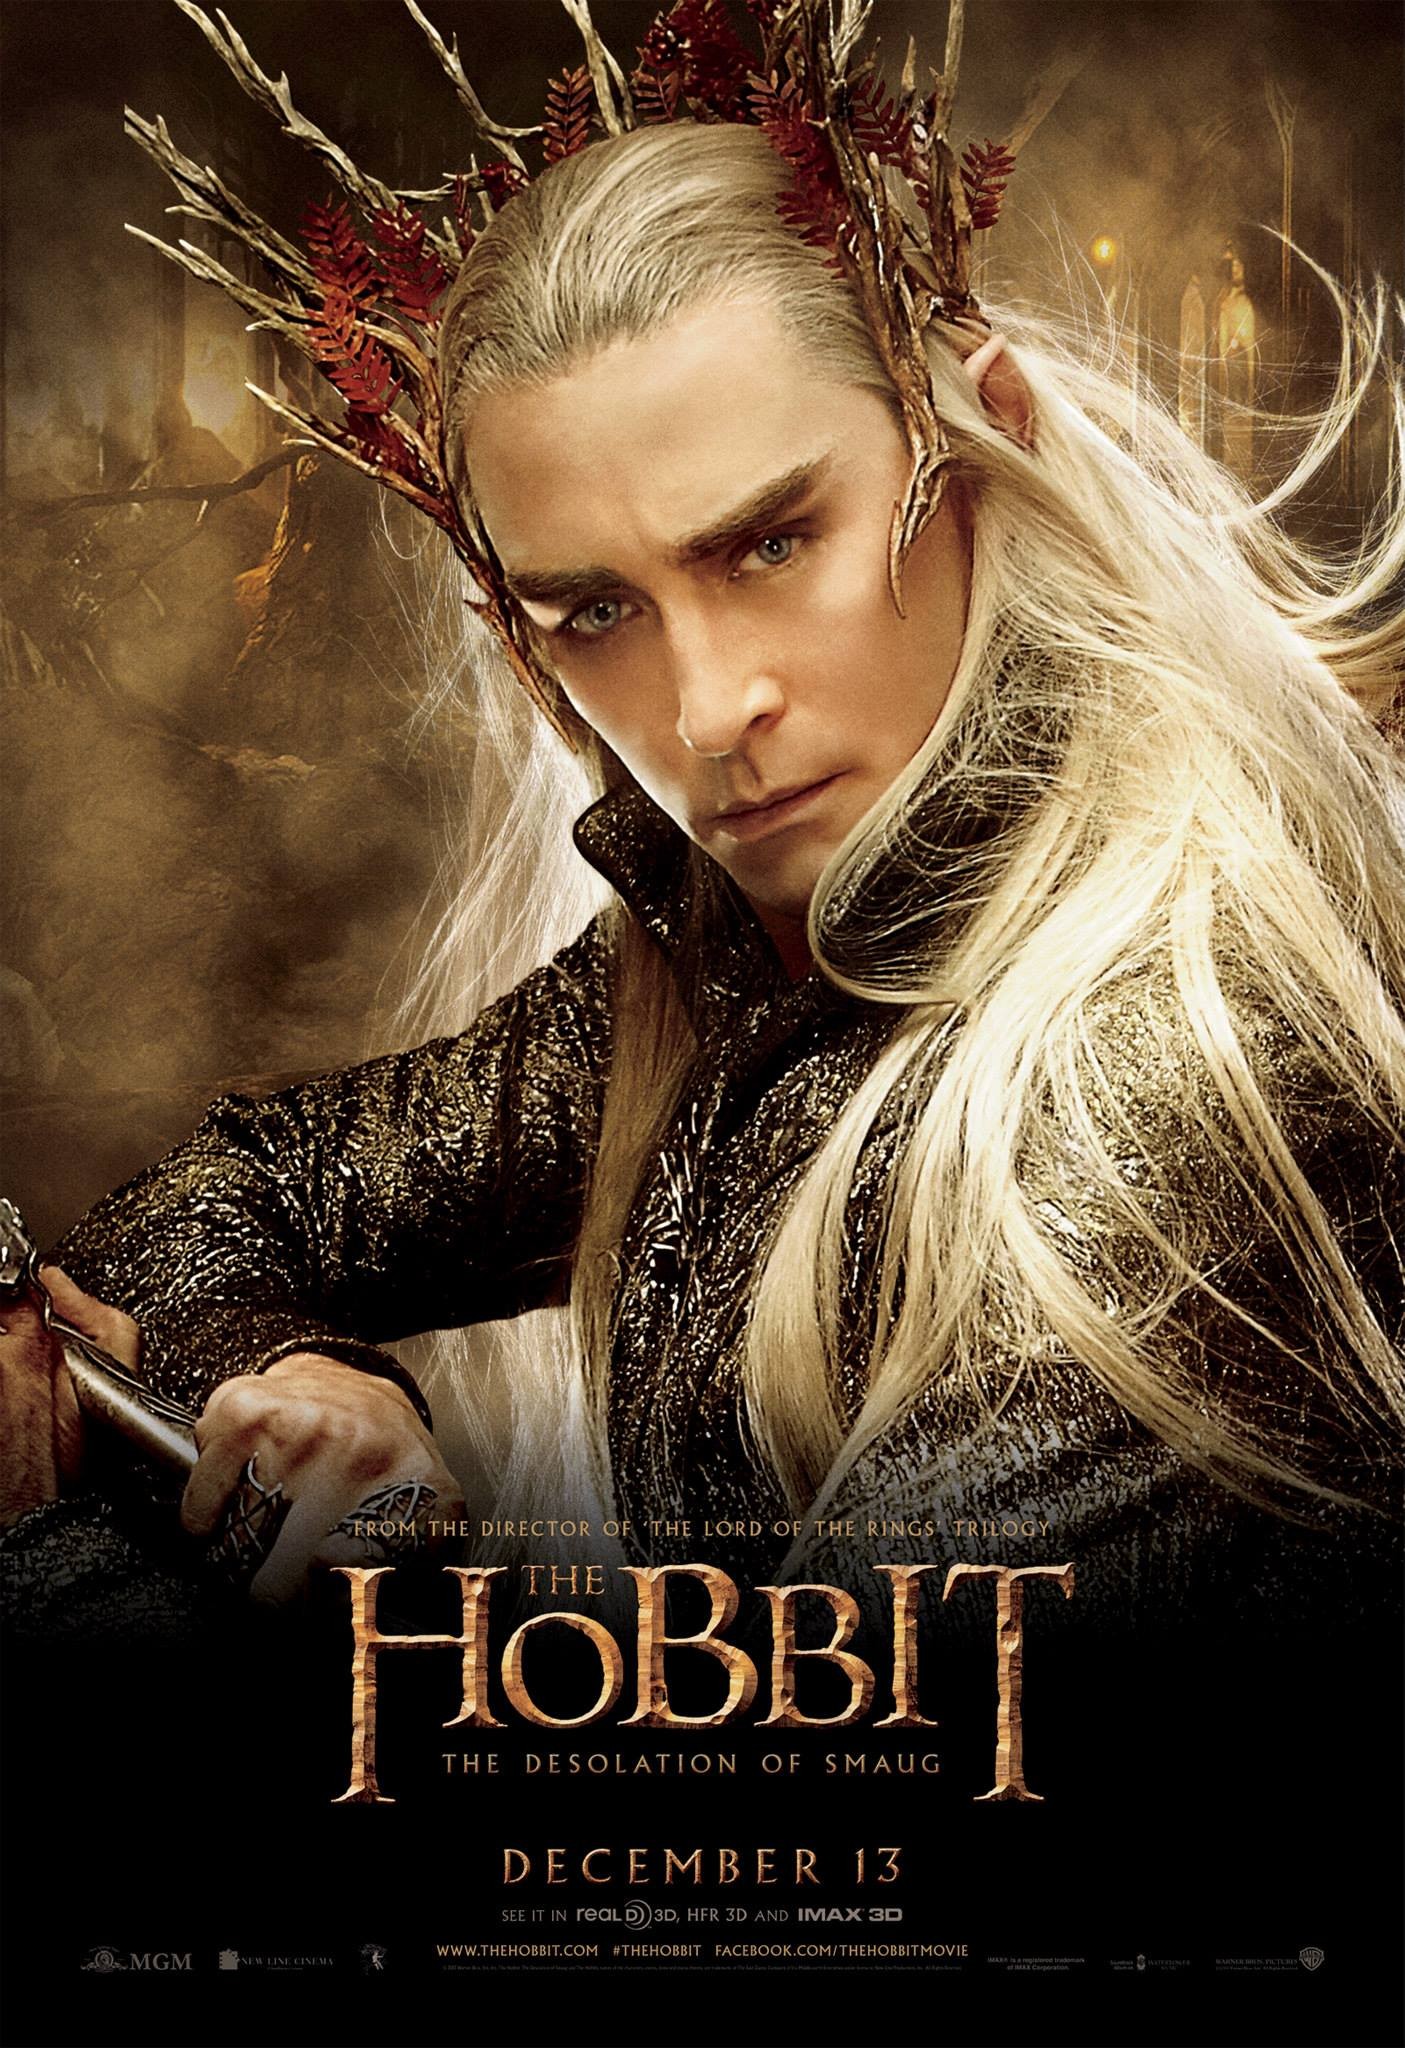 Mega Sized Movie Poster Image for The Hobbit: The Desolation of Smaug (#14 of 33)